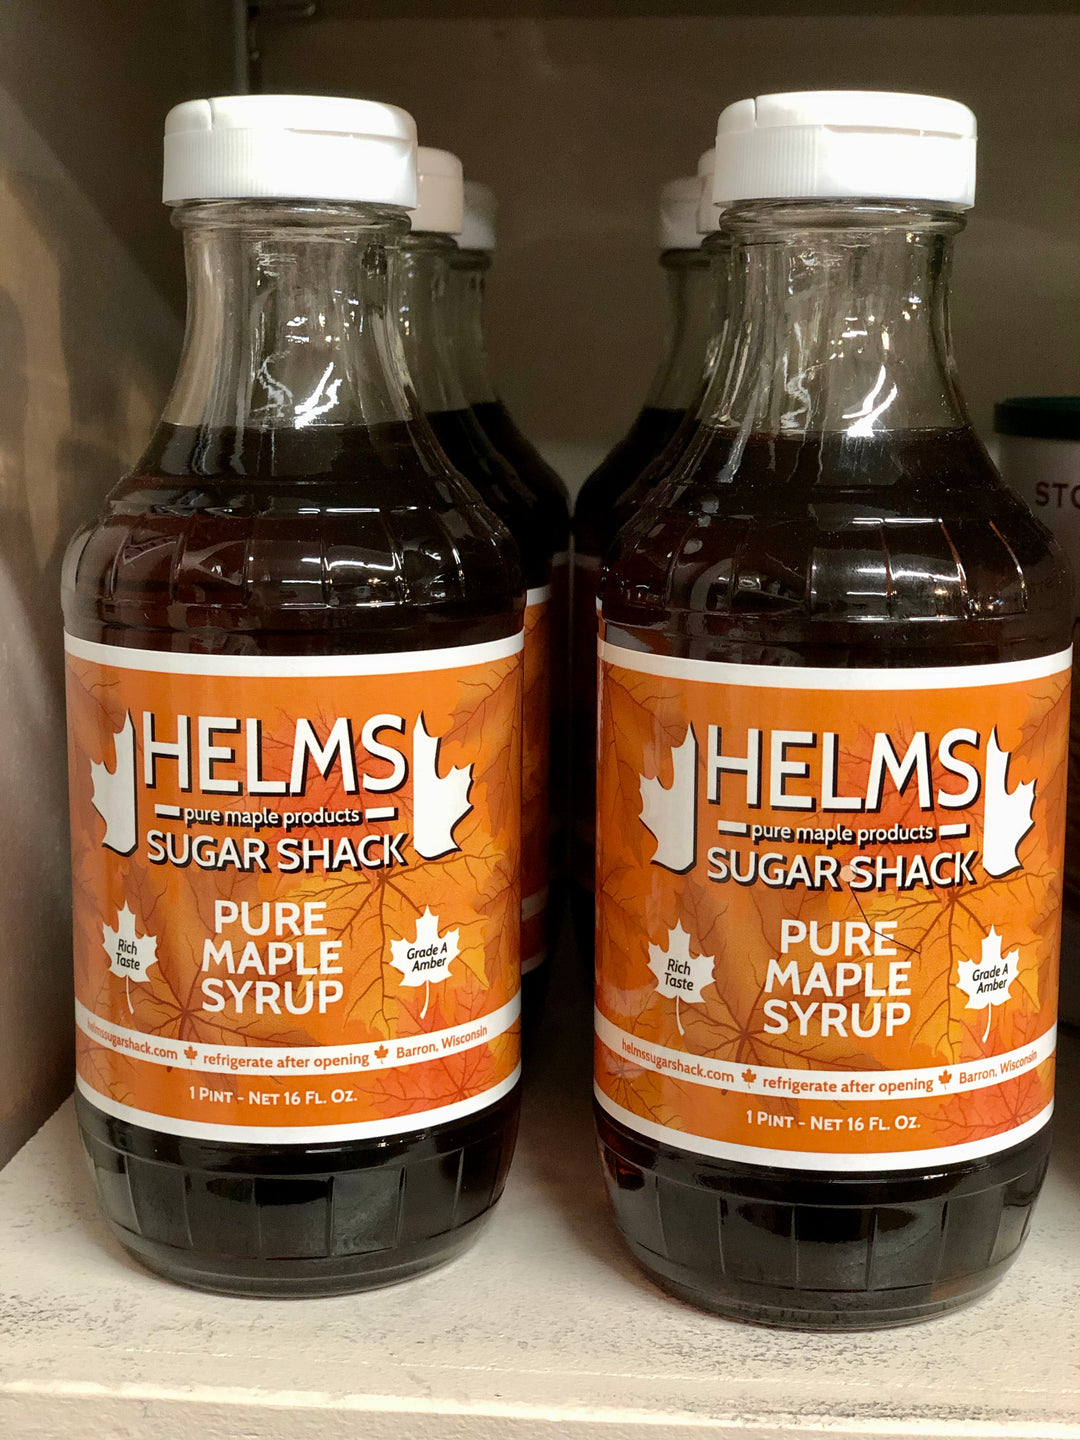 Helm's Sugar Shack Pure Maple Syrup: Grade A